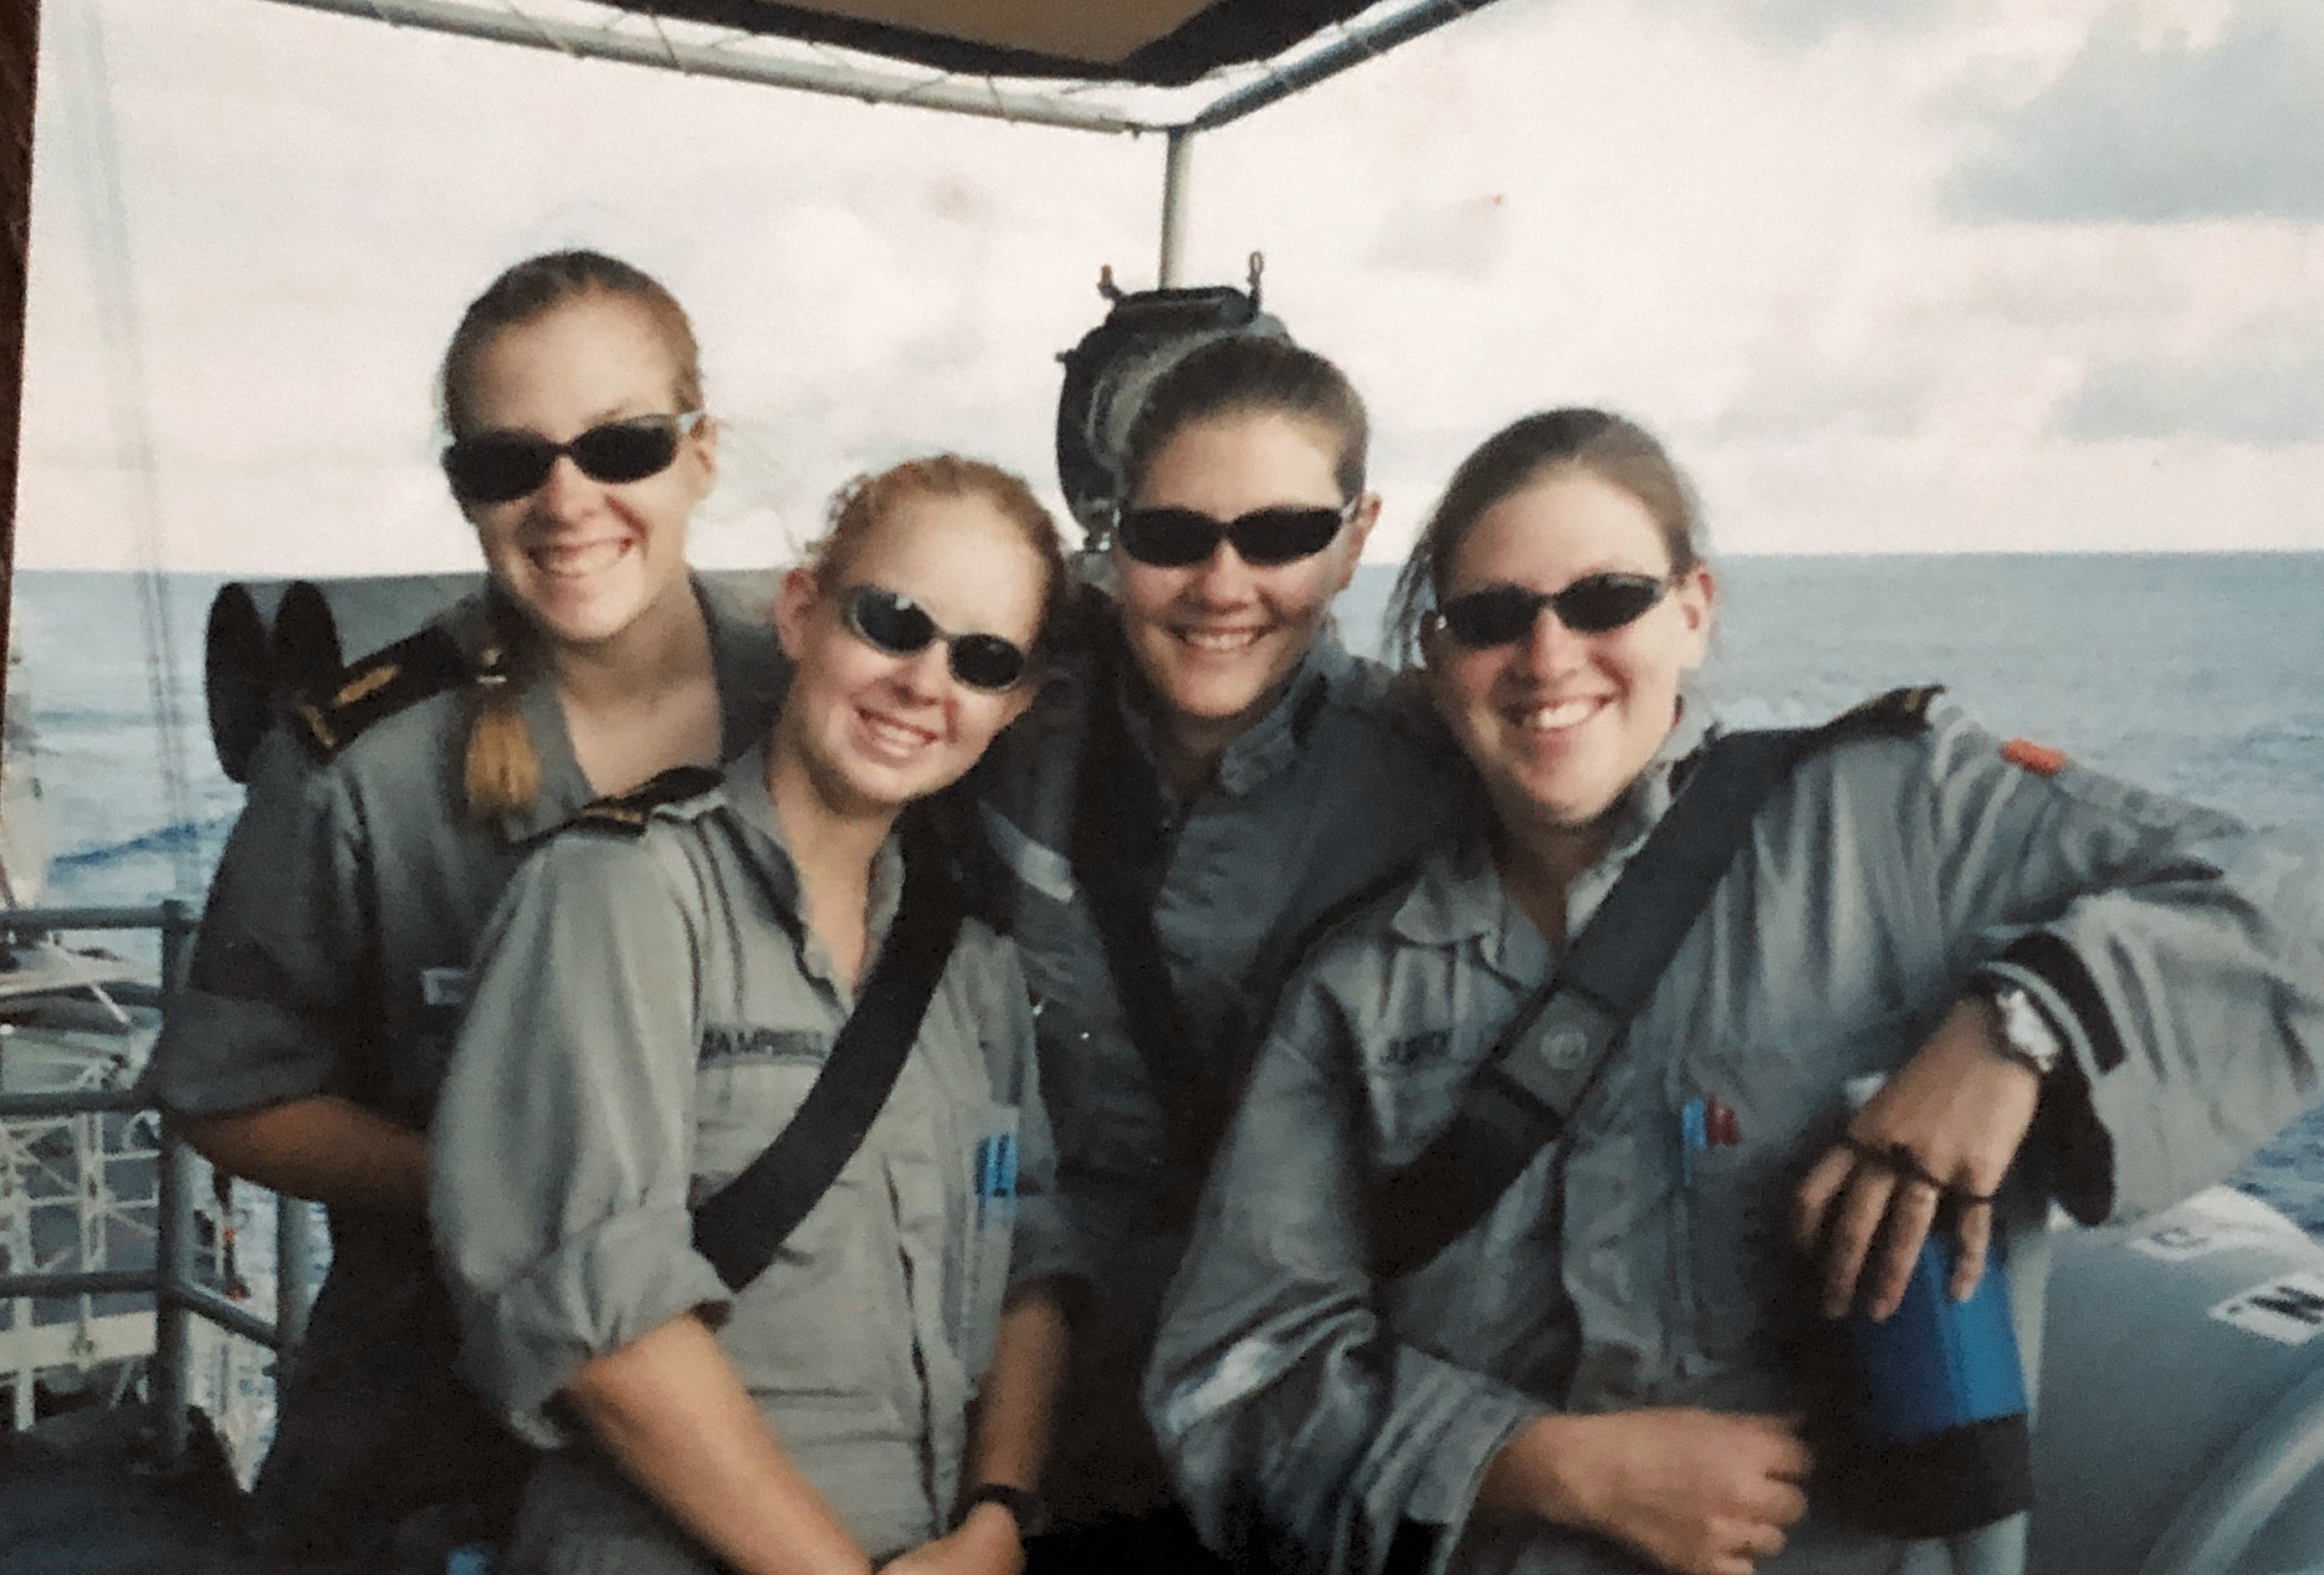 Deployed in the Gulf 2002, with Simone Campbell, Paula Burleigh and Gabby Judd